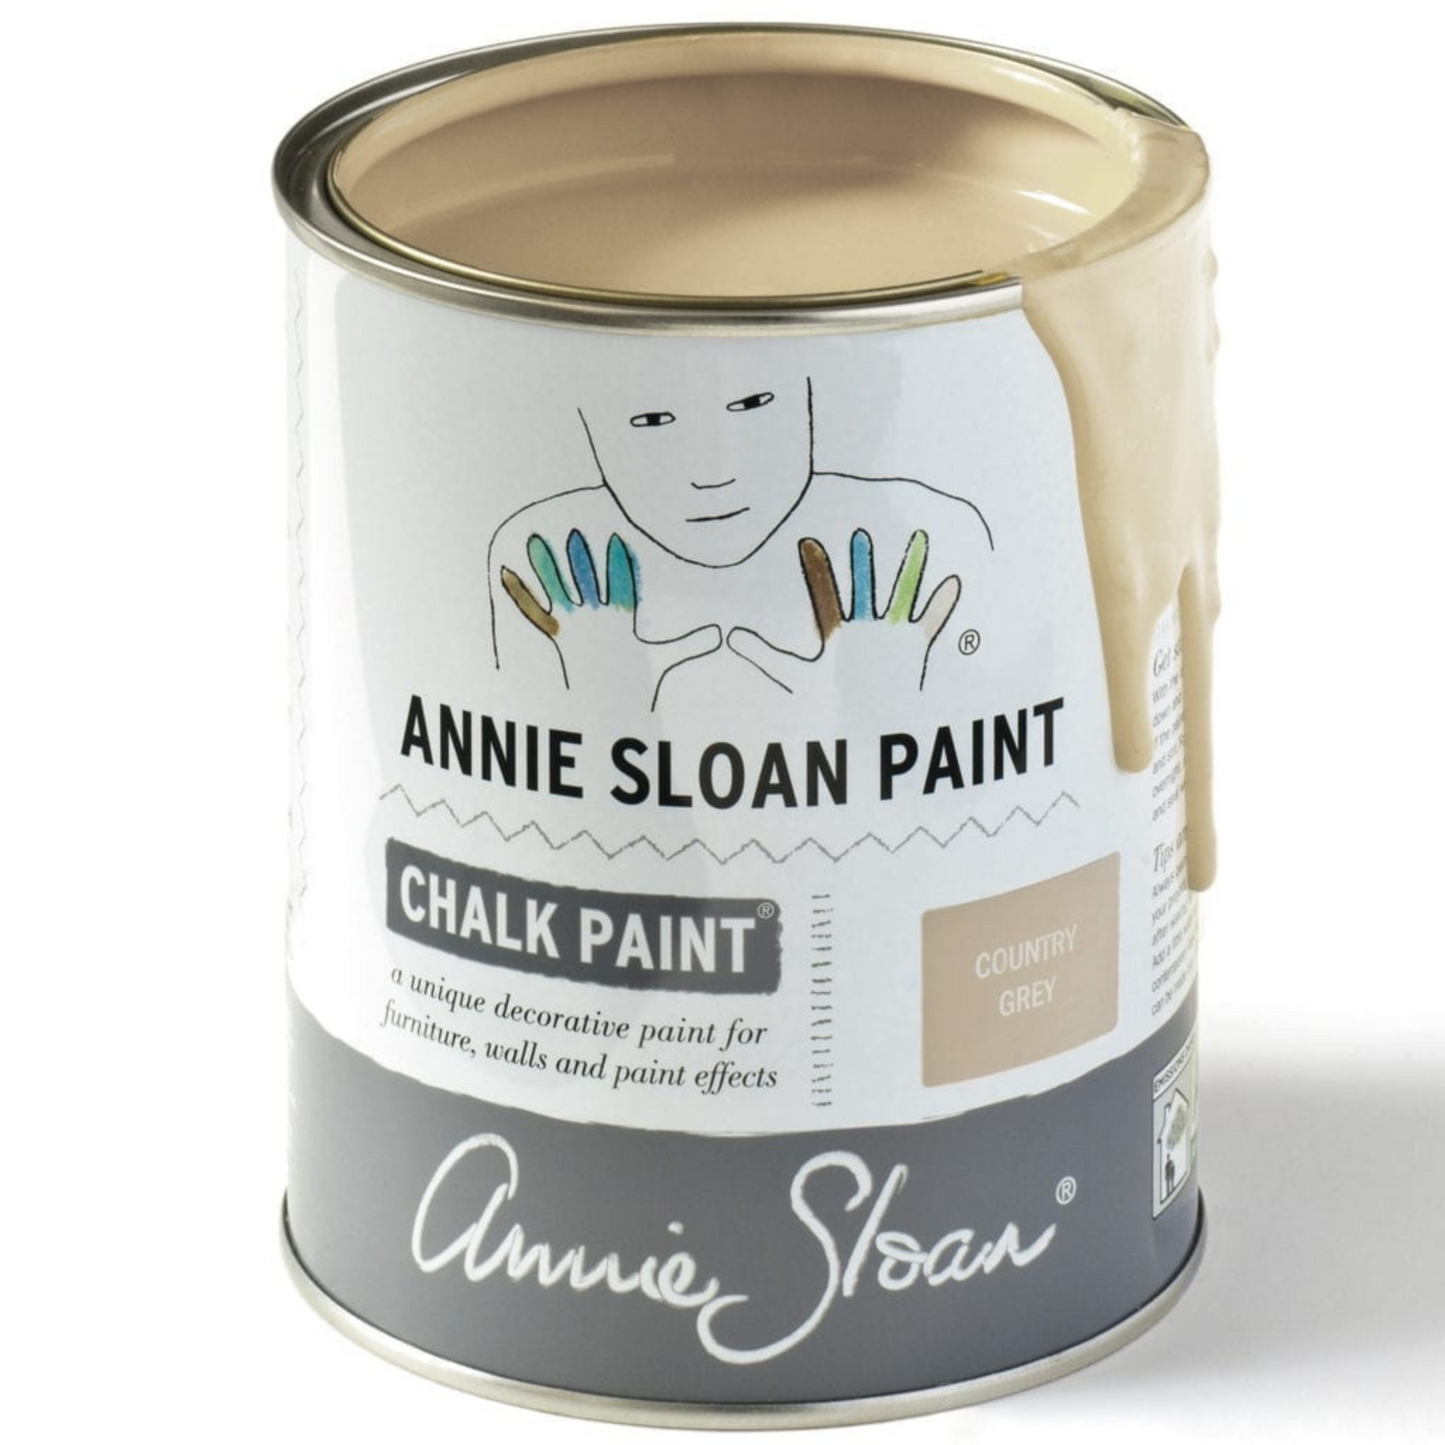 Can of Country Grey Annie Sloan Chalk Paint.